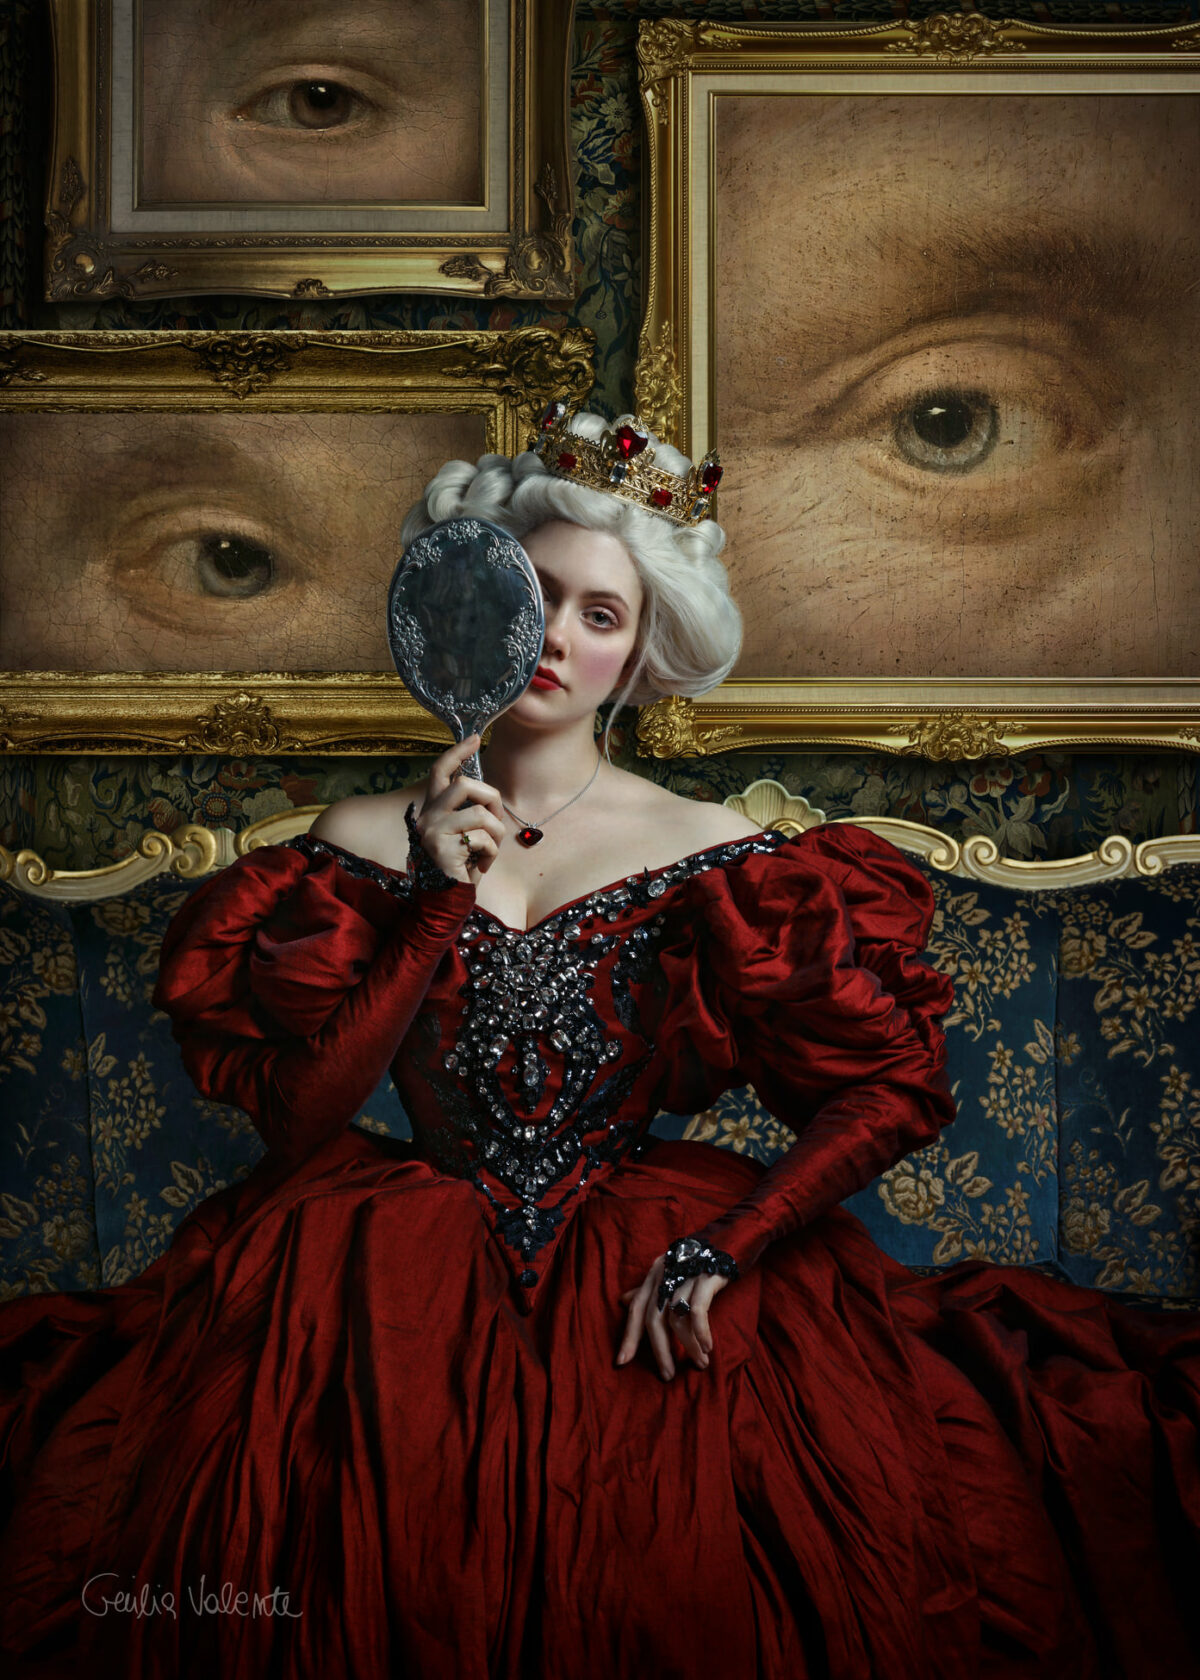 Wonderful Digital Collages Inspired By Renaissance And Vintage Aesthetics By Giulia Valente 3